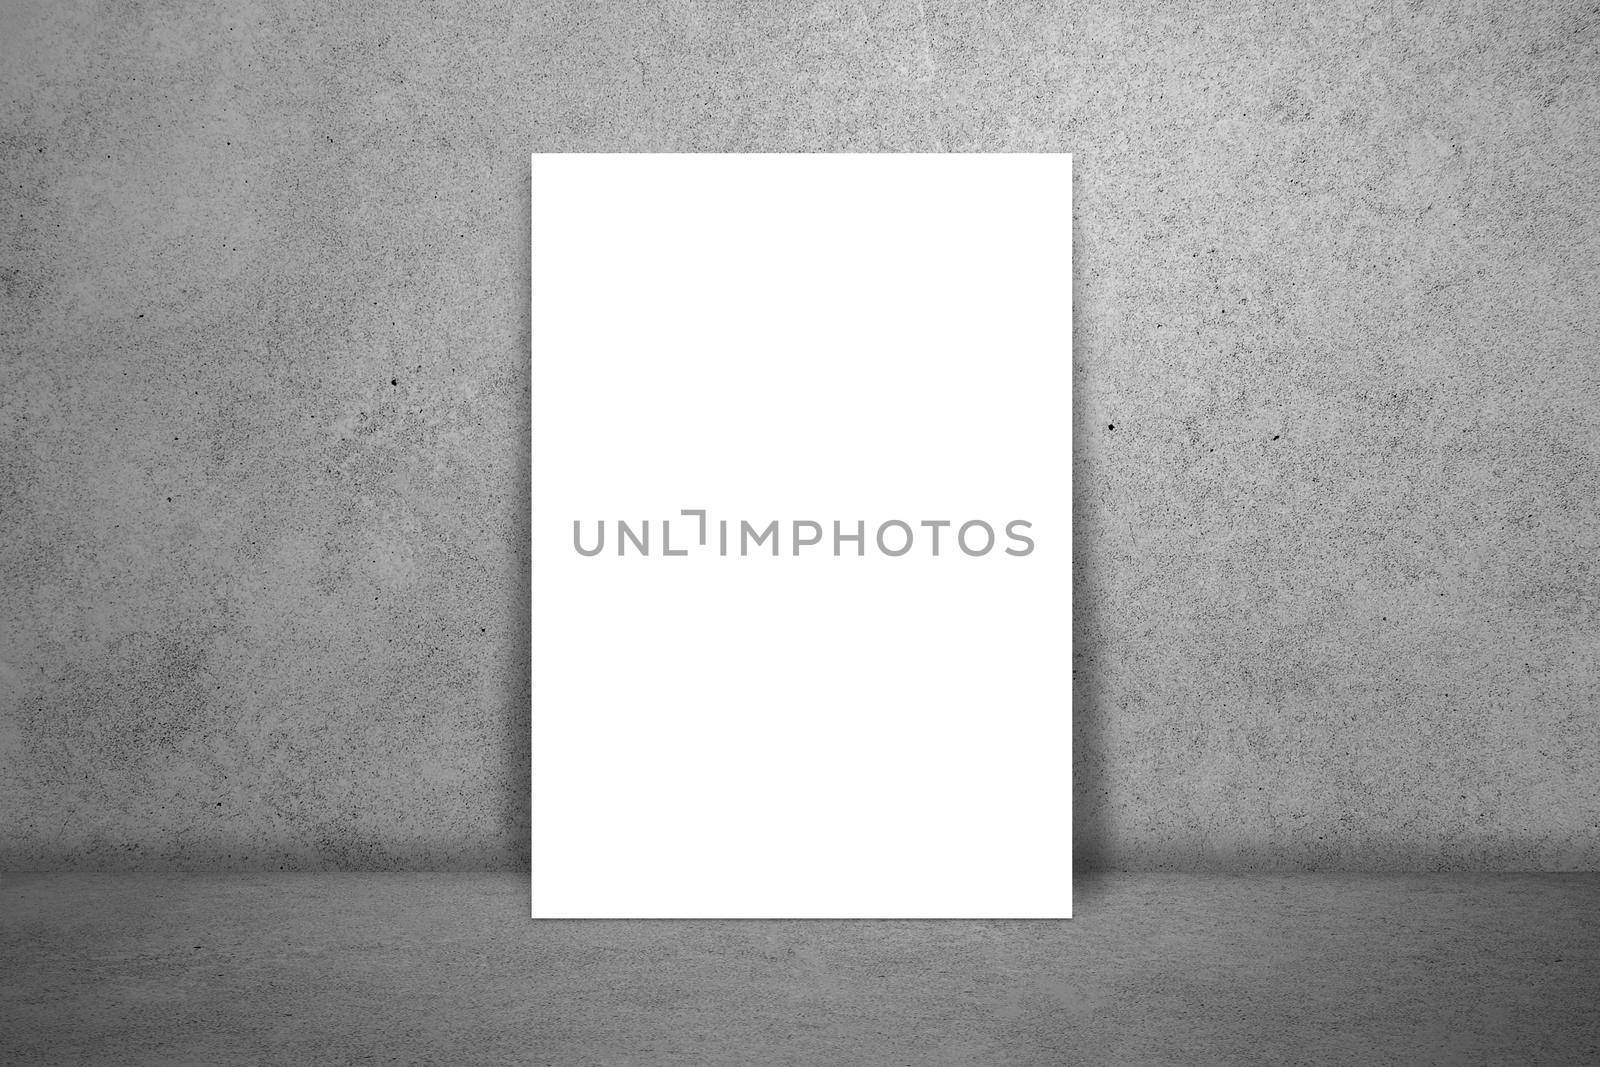 Mockup template, paper white on texture background empty for presentation or ads, elements for advertising, business branding, board blank for design, canvas print or card, object art. by nnudoo